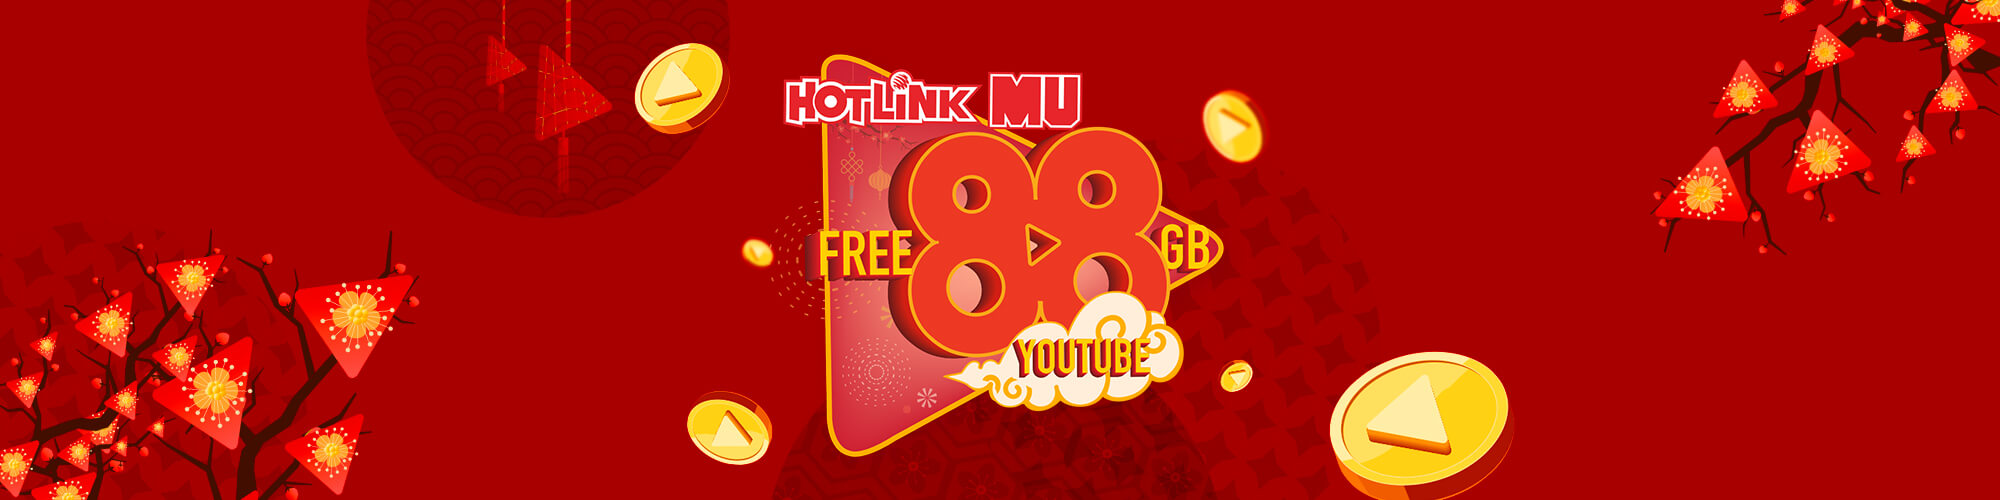 Enjoy FREE 88GB for YouTube with every HotlinkMU purchase this Chinese New Year